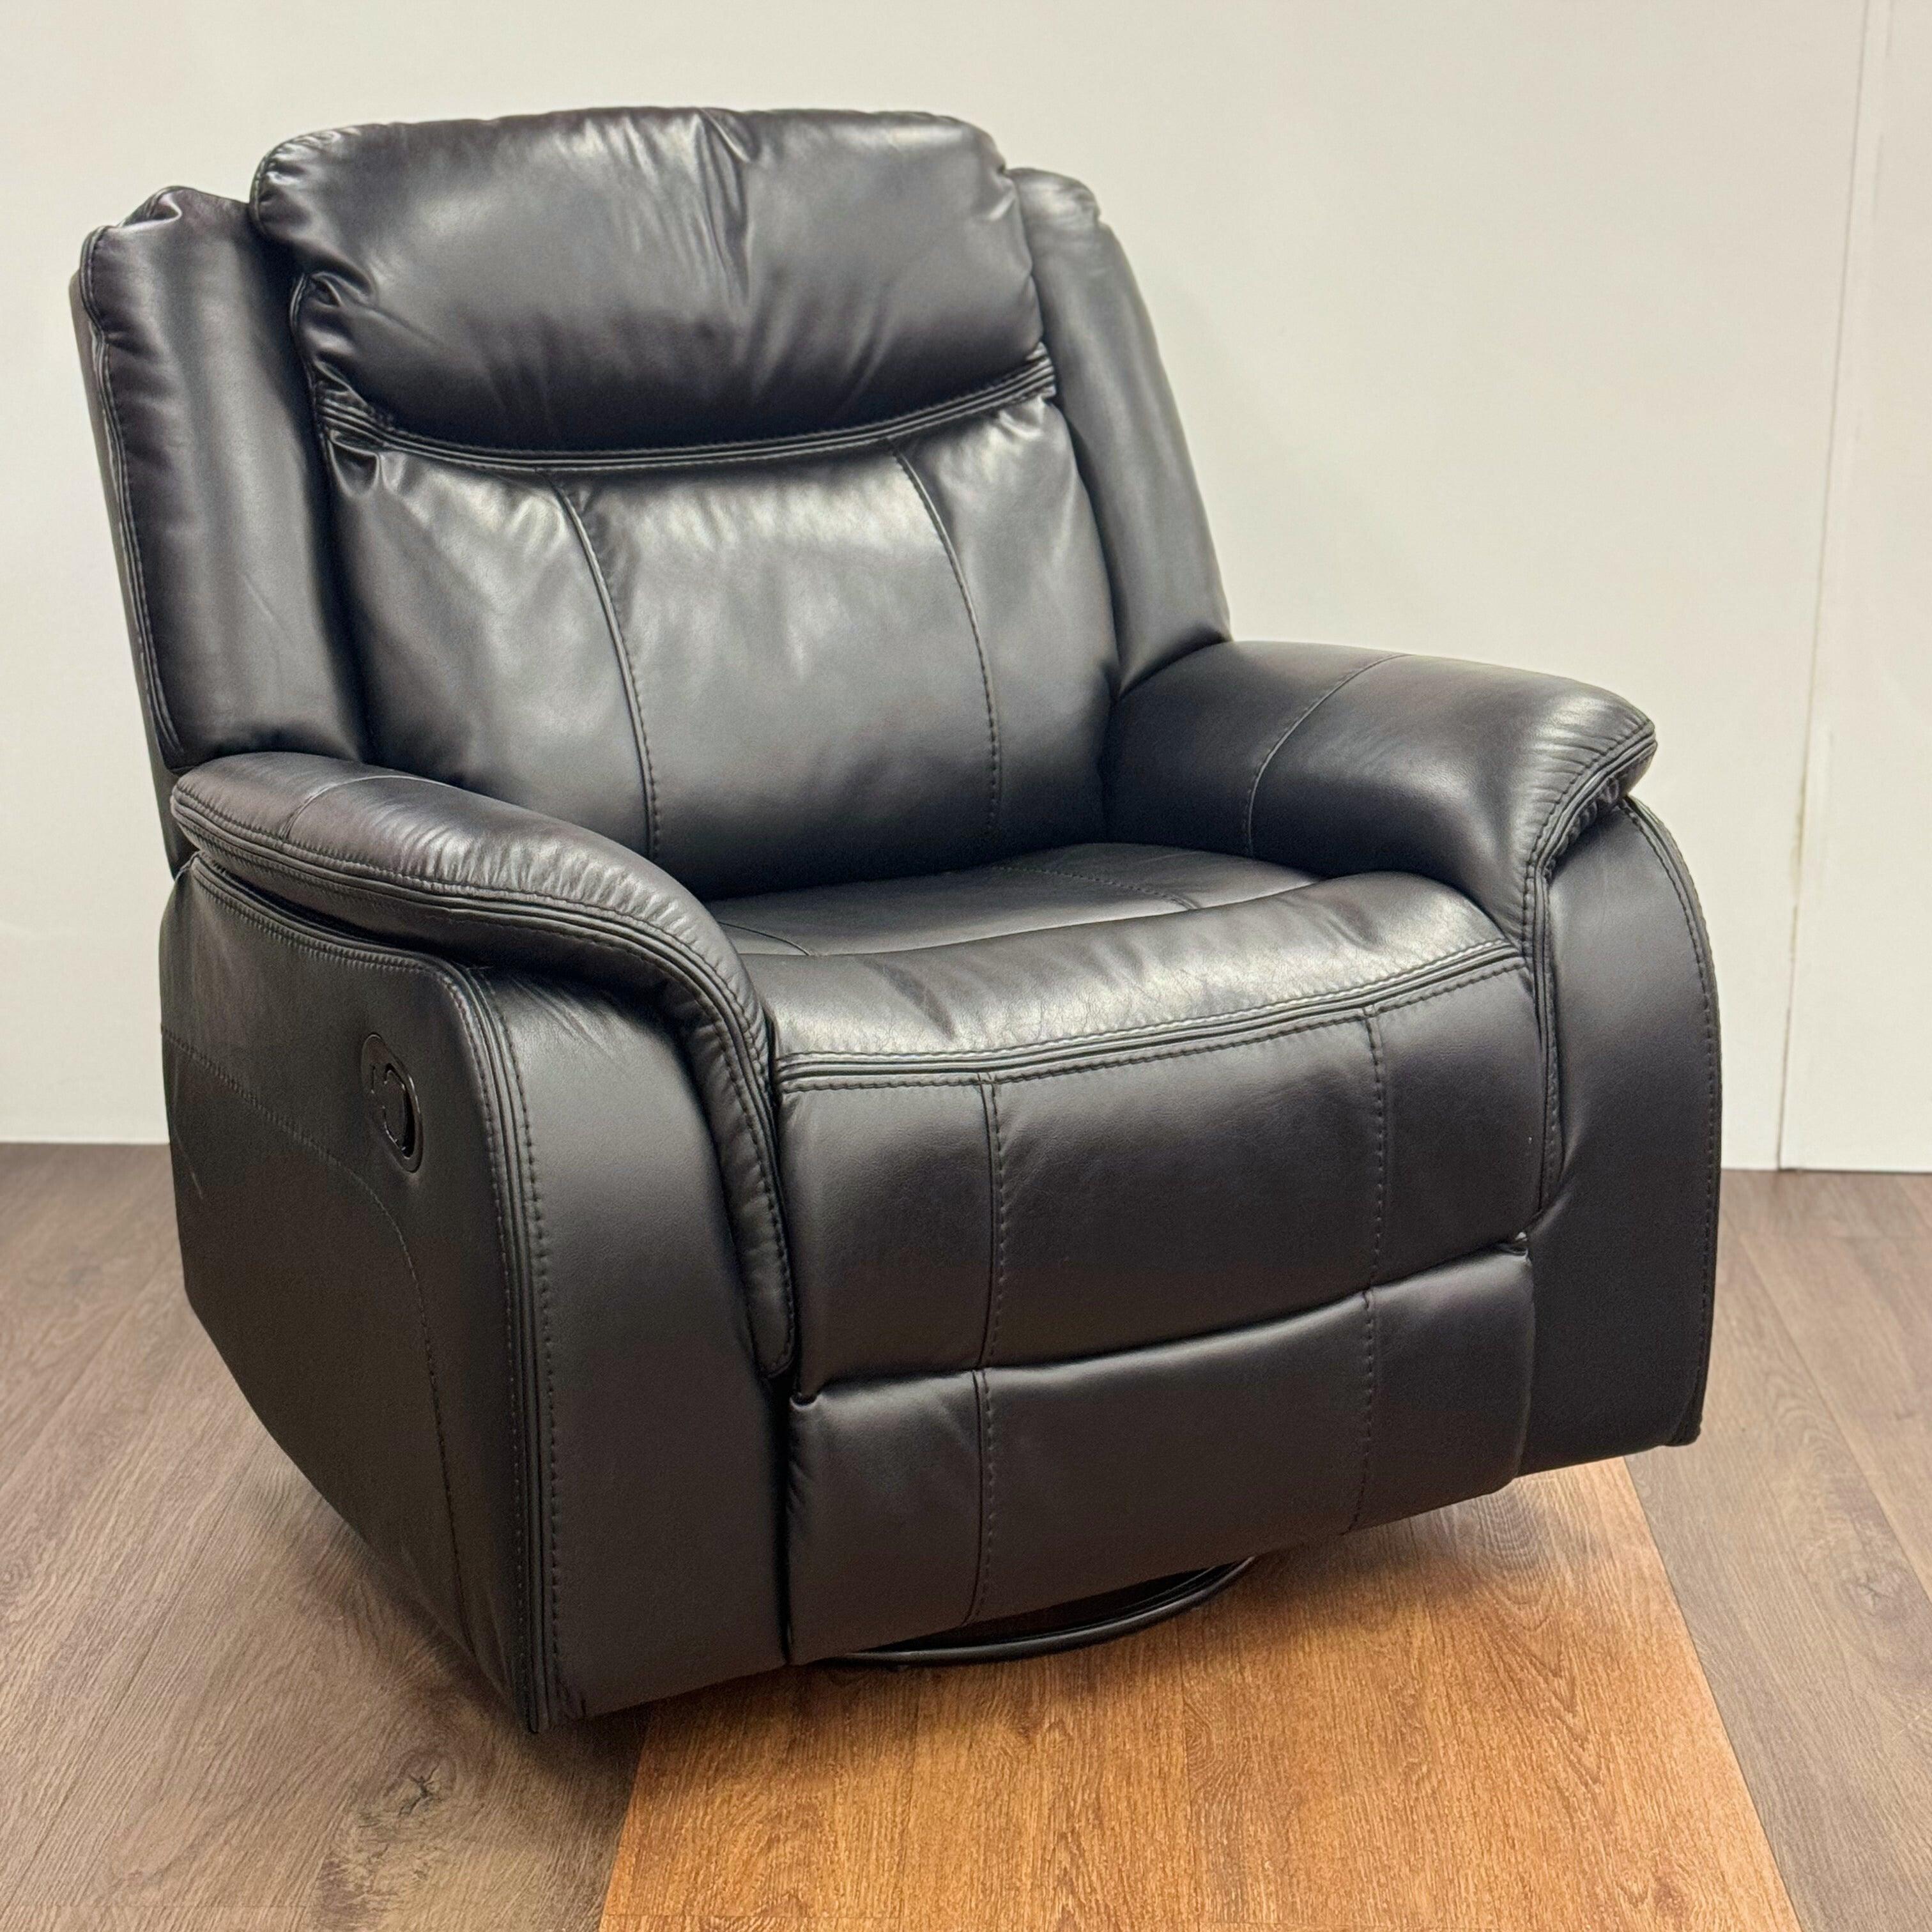 Sunshine Electric Recliner Chair